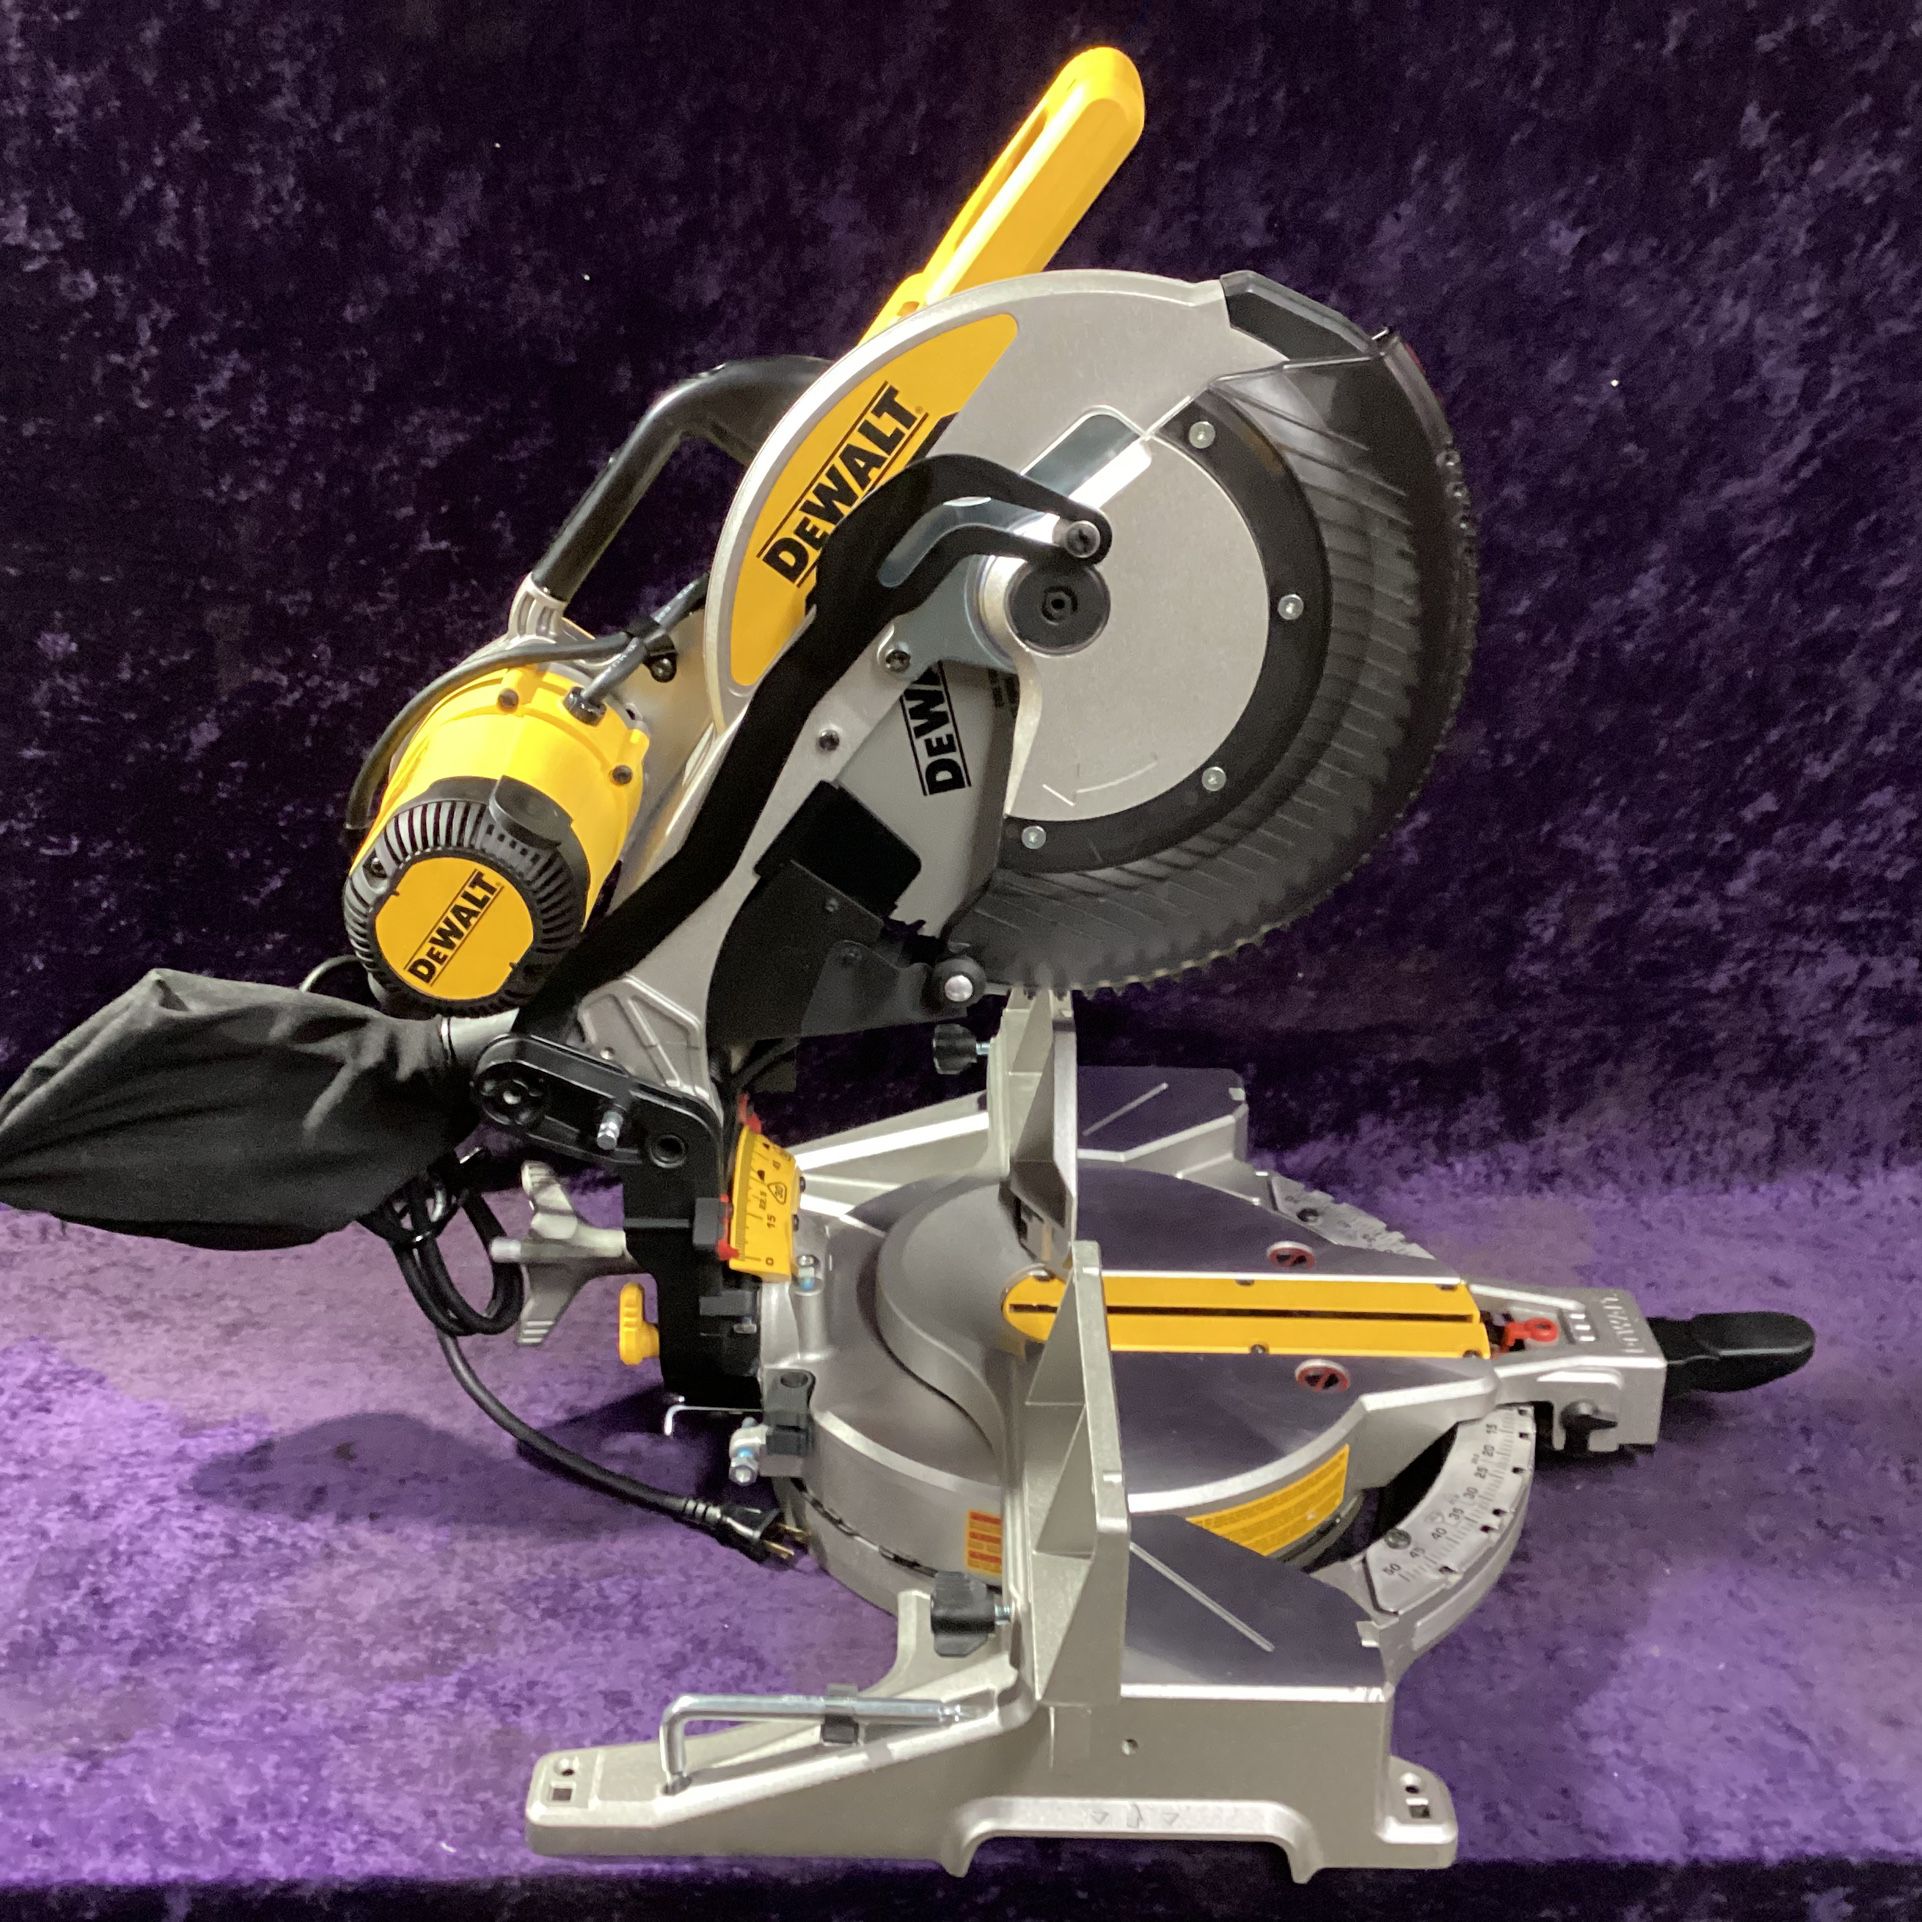 🧰🛠DEWALT 15 Amp Corded 12” Compound Double Bevel Miter Saw LIKE NEW!(MISSING CLAMP)-$270!🧰🛠